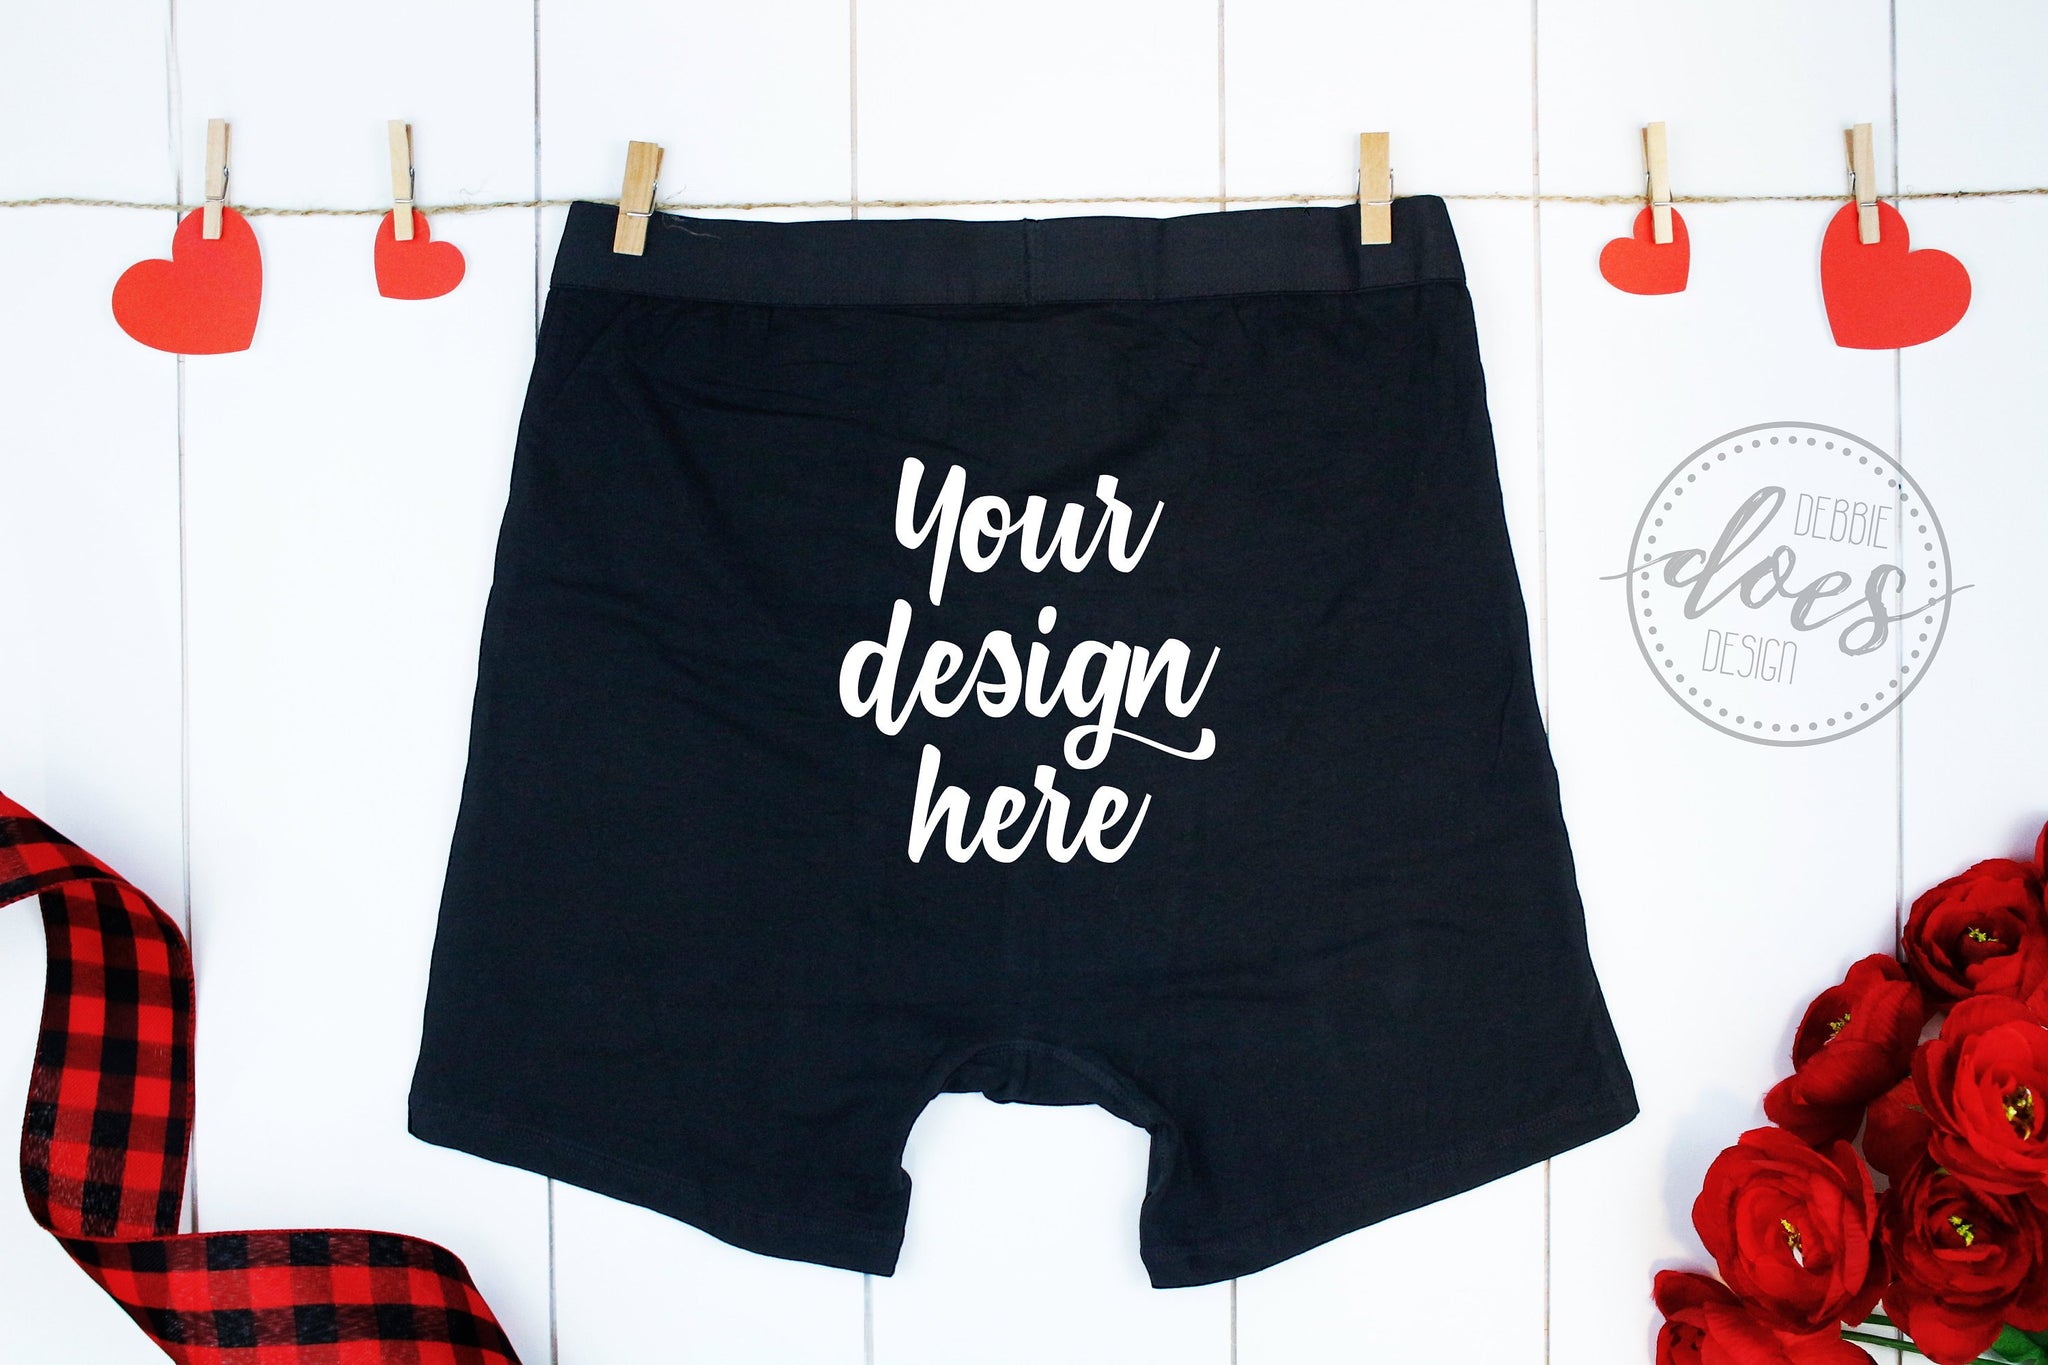 Download Black Boxer Briefs Mockup with Hearts and Roses | BACK VIEW - Debbie Does Design